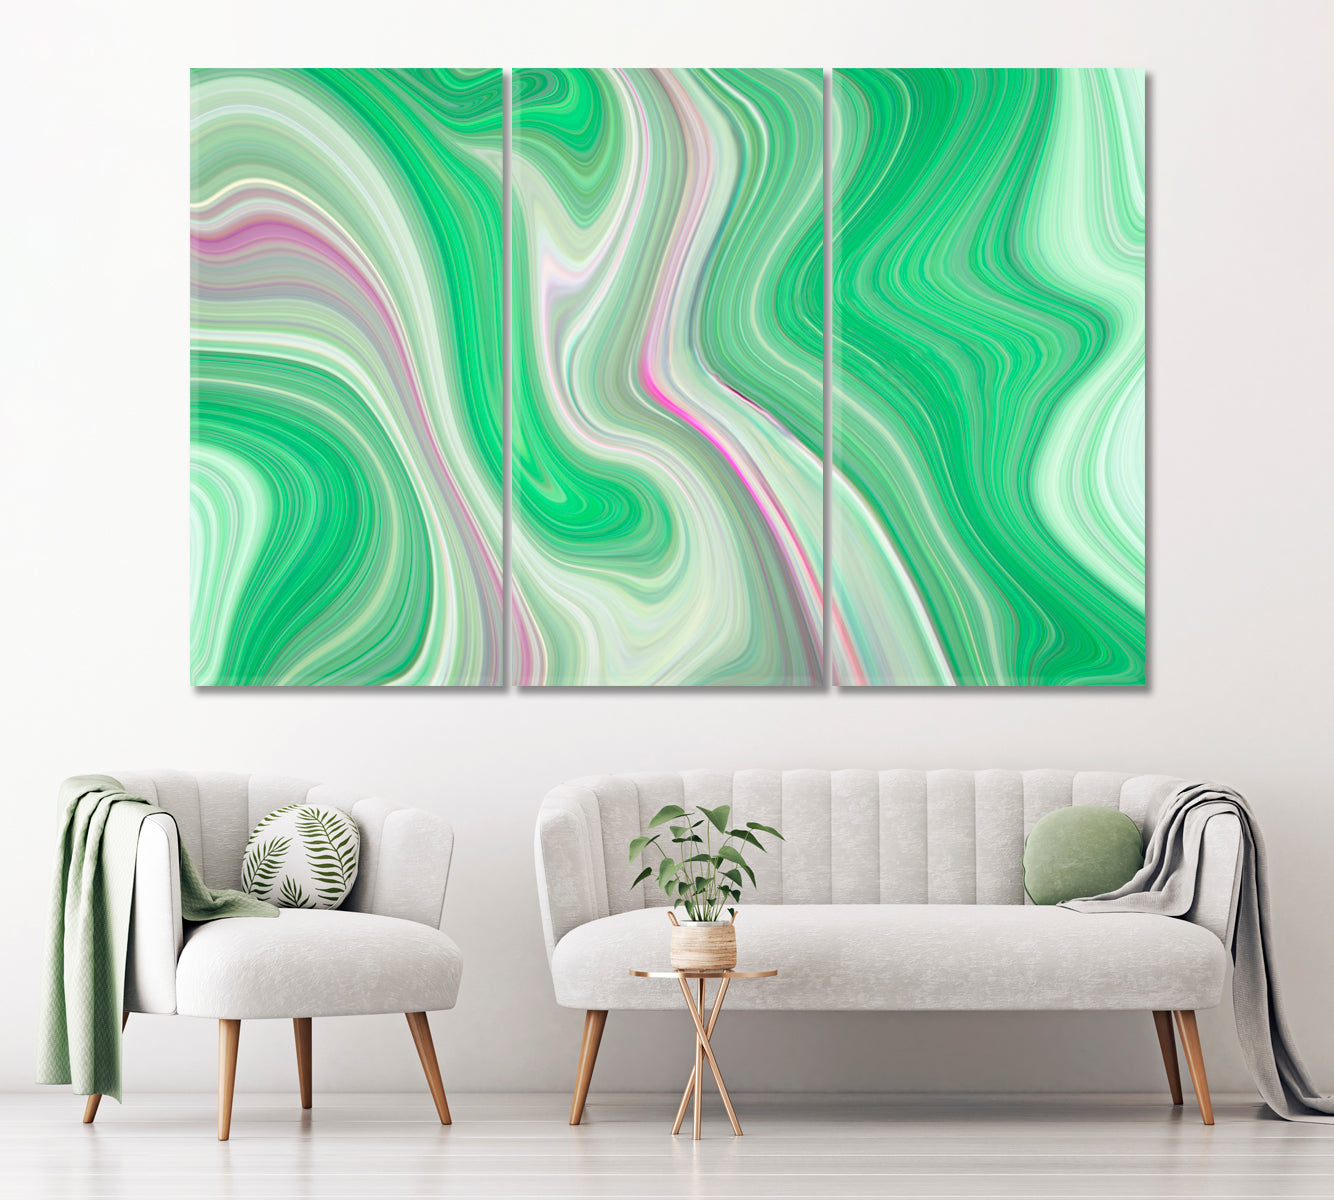 Green Marble Design Canvas Print ArtLexy 3 Panels 36"x24" inches 